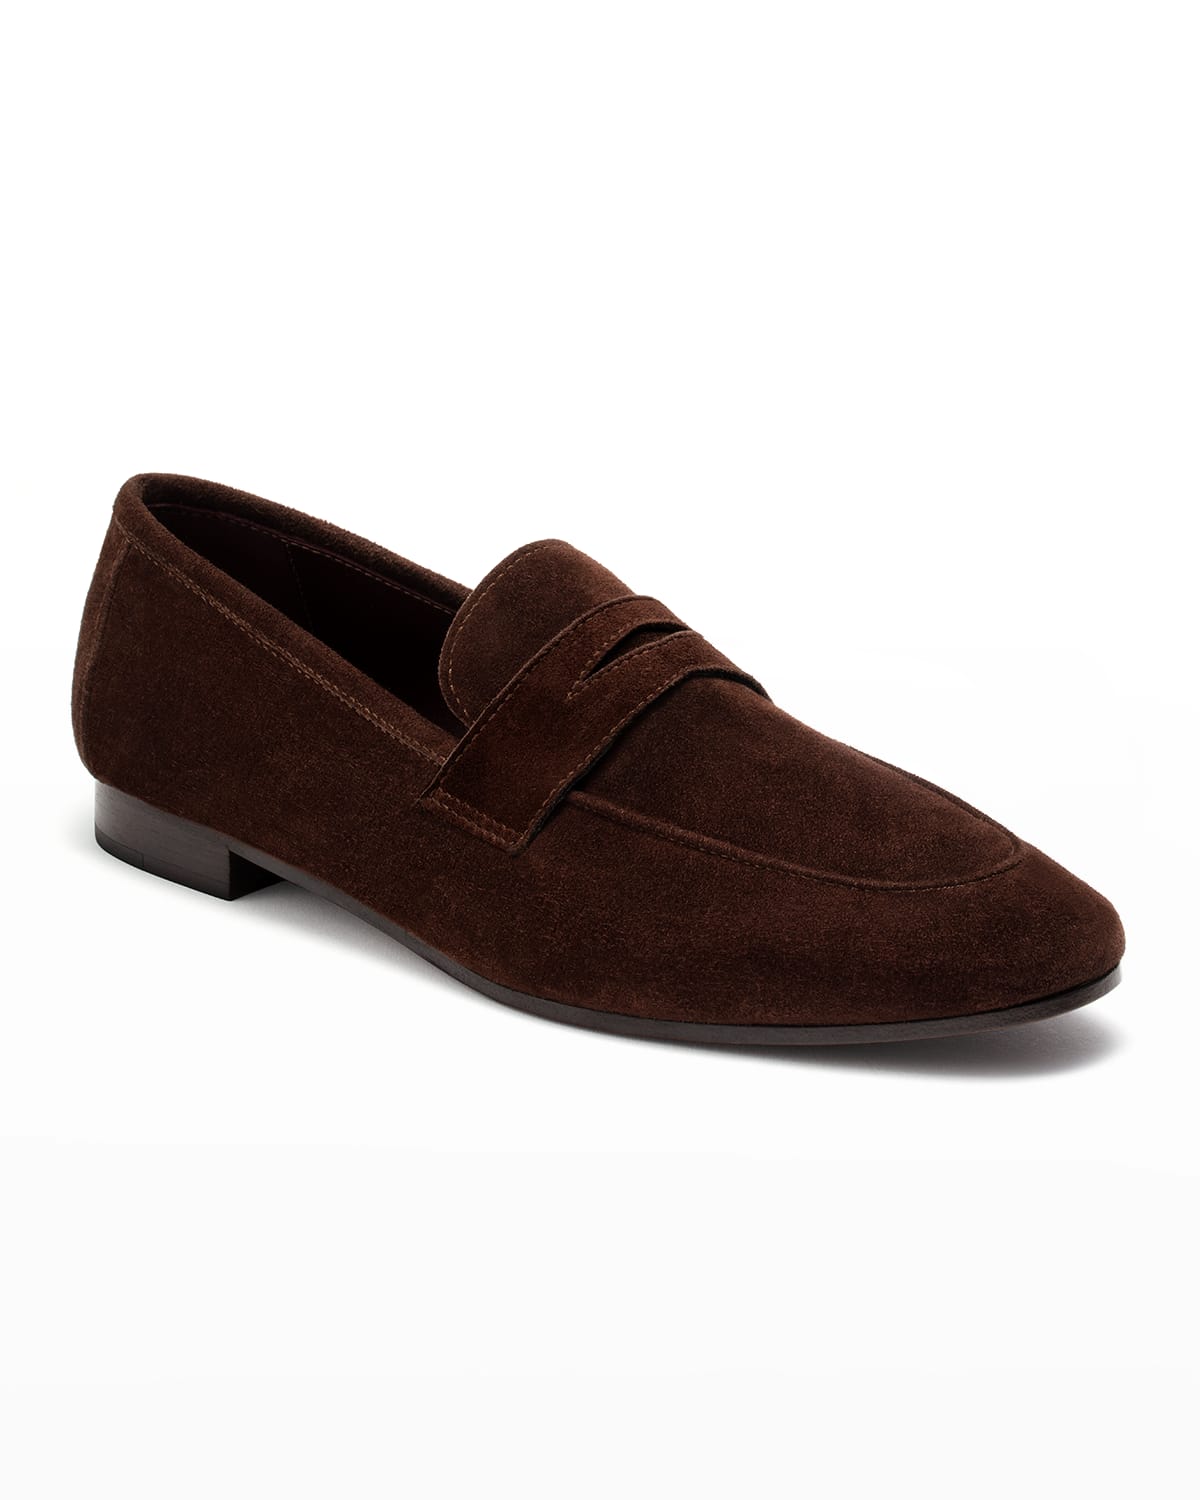 BOUGEOTTE COFFEE SUEDE FLAT LOAFERS